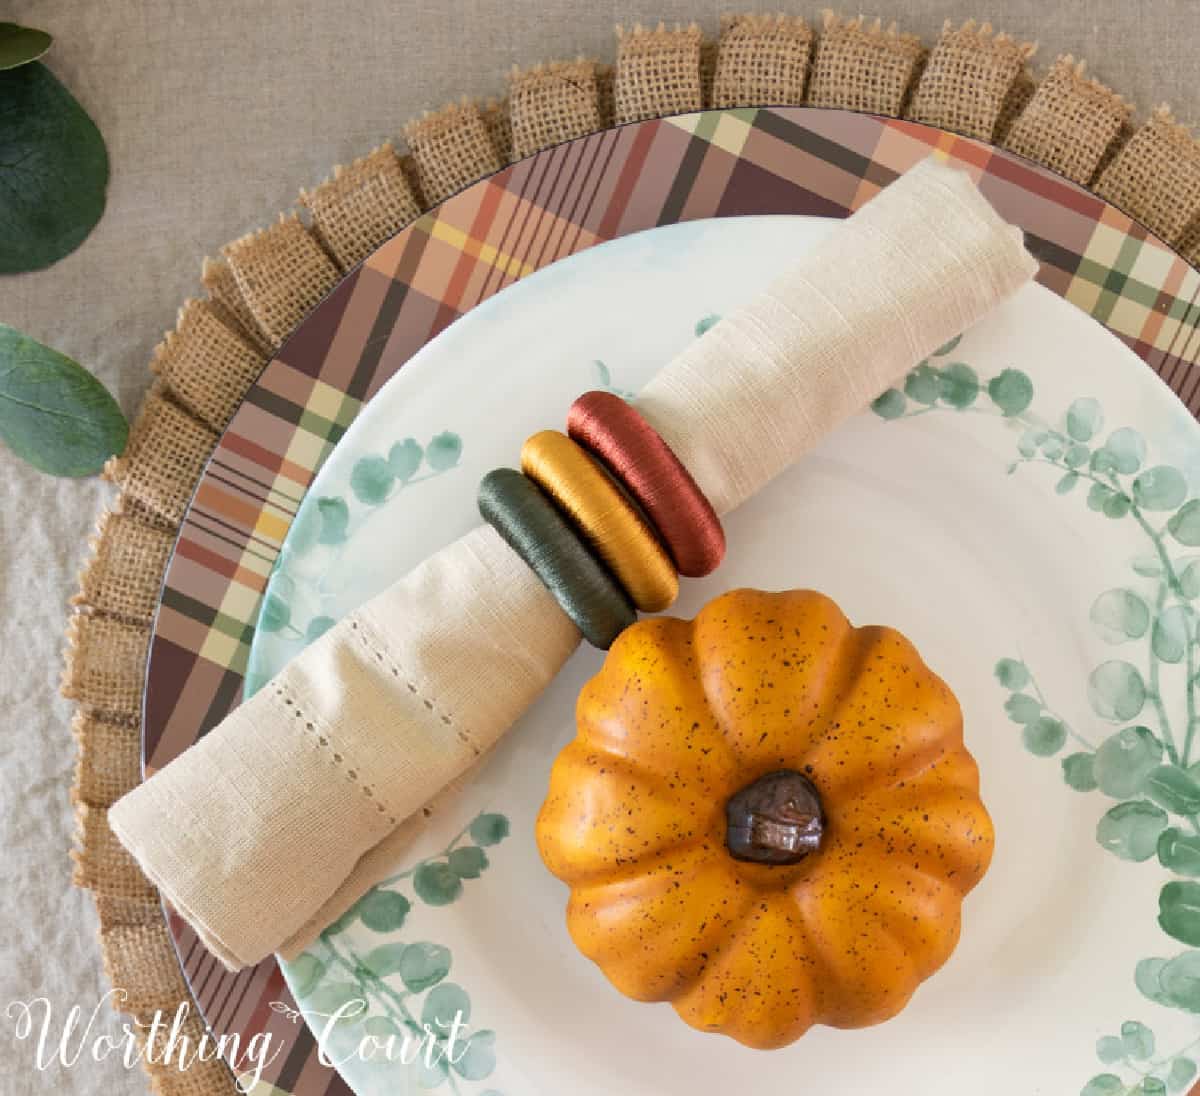 portion of thanksgiving tablescape with fall colors and eucalyptus in the centerpiece